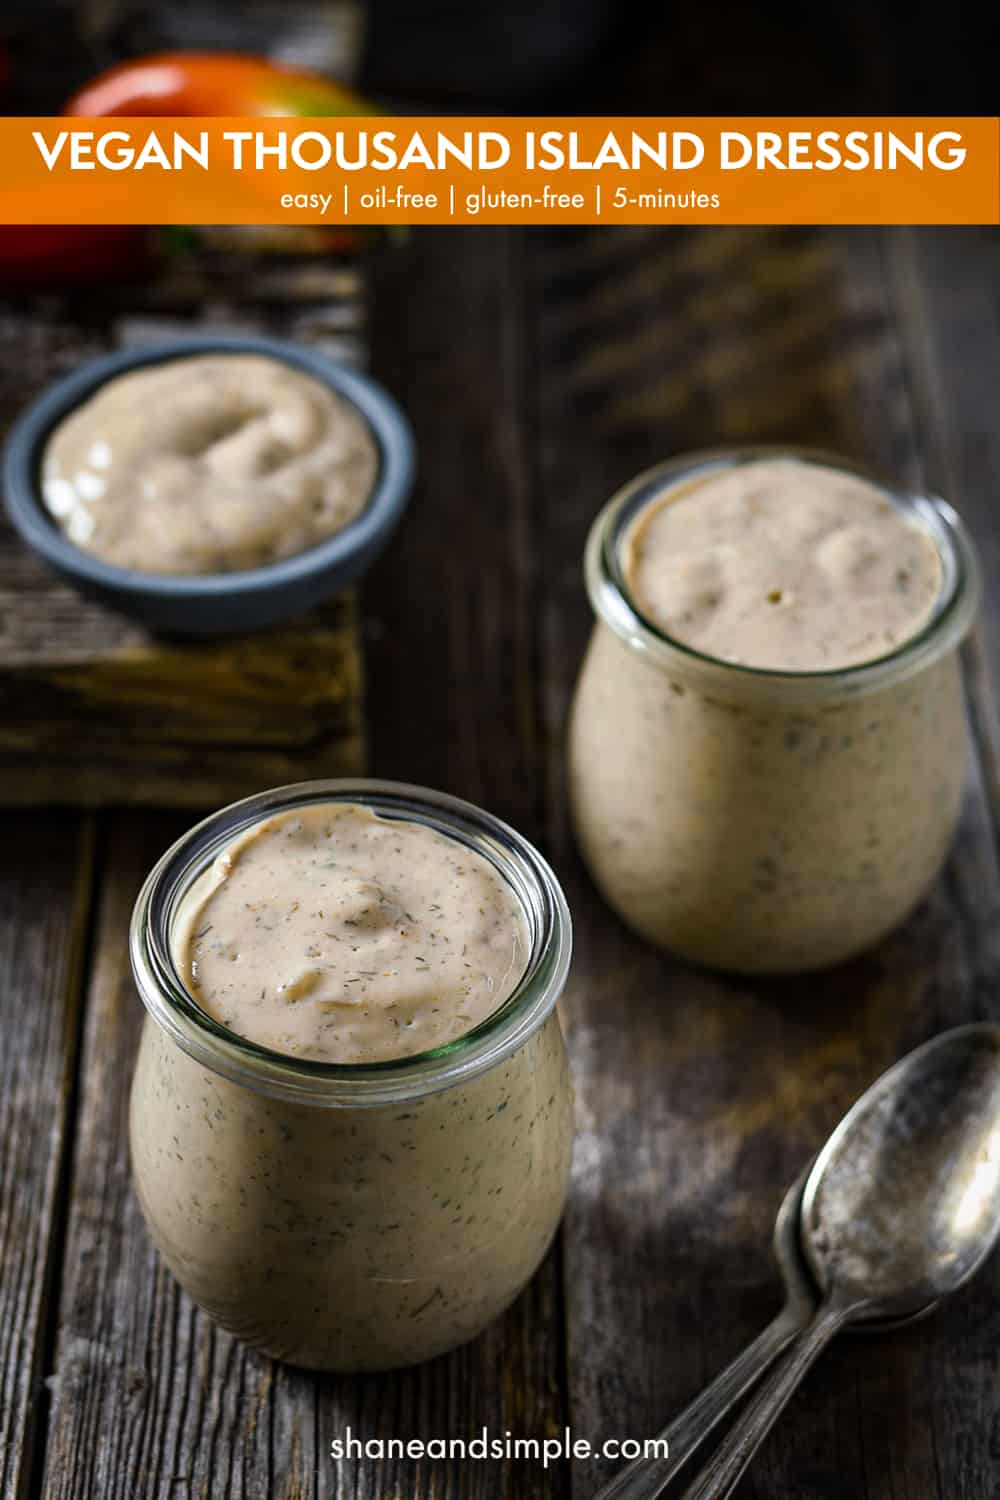 This Vegan Thousand Island Dressing recipe is so easy to make, tangy, sweet, and full of flavor like the original classic. One bowl and 5 minutes are all you need to make this healthy vegan dressing. Oil-free, gluten-free, and nut-free!